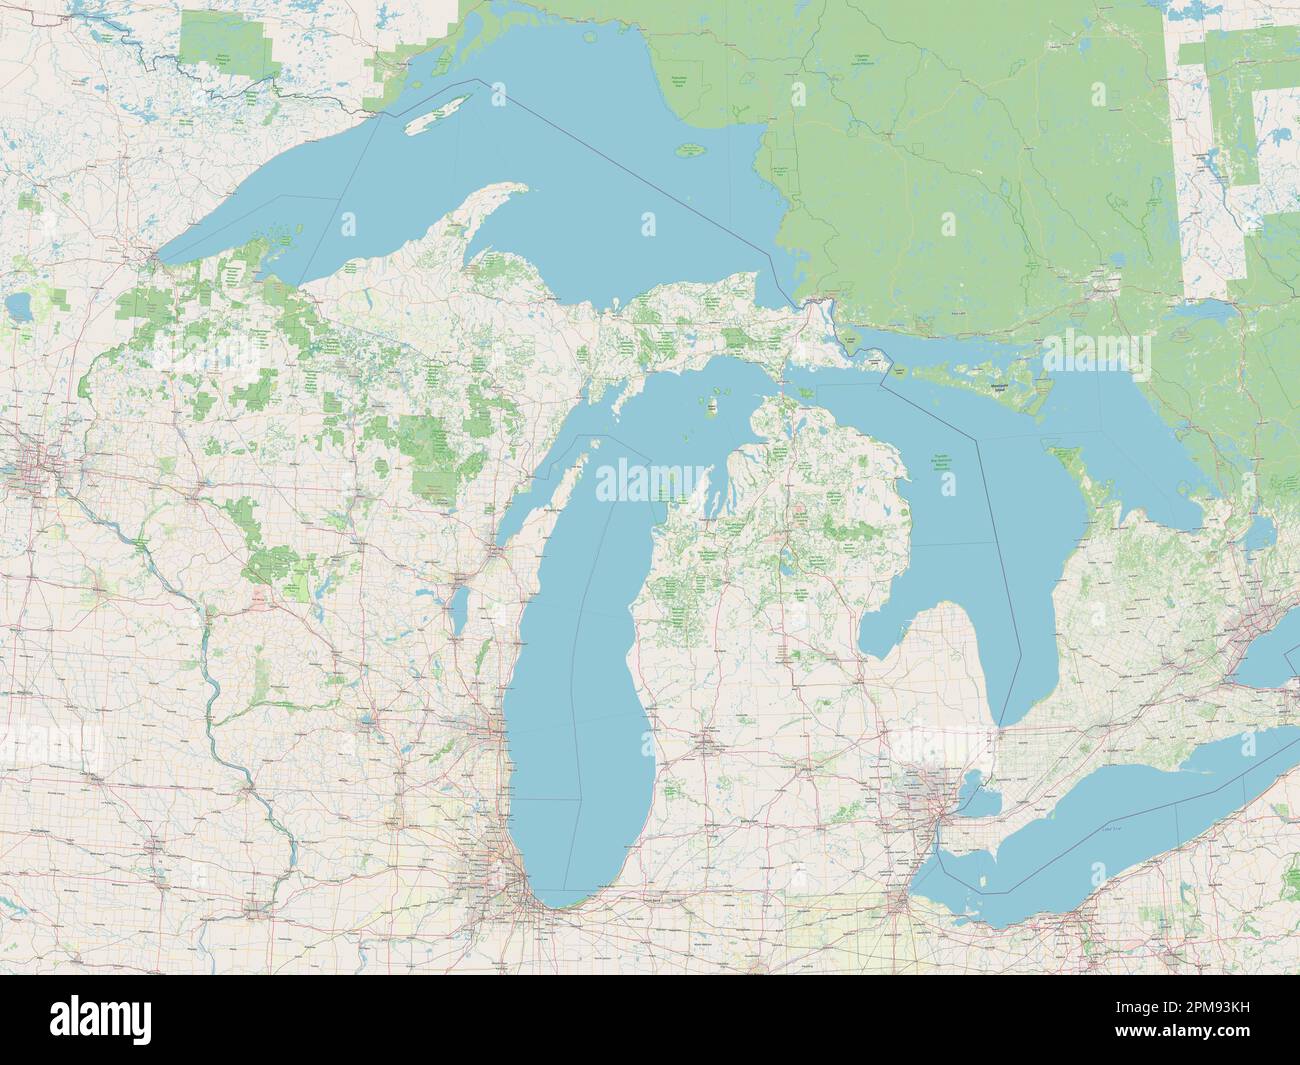 Michigan, state of United States of America. Open Street Map Stock Photo